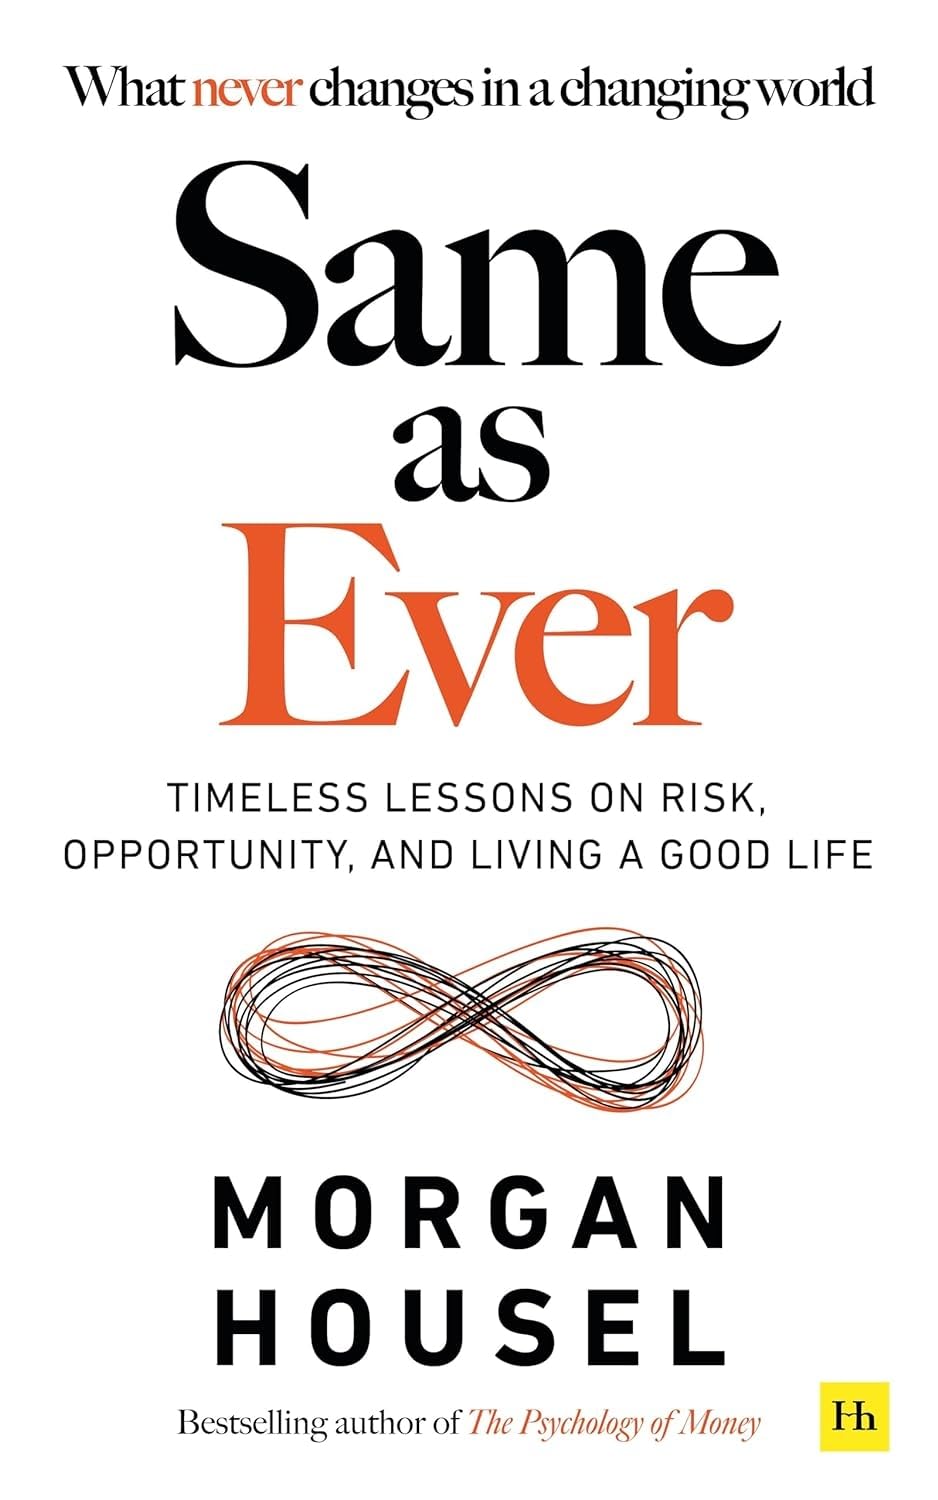 Same As Ever: Timeless Lessons on Risk, Opportunity, and Living a Good Life by Morgan Housel